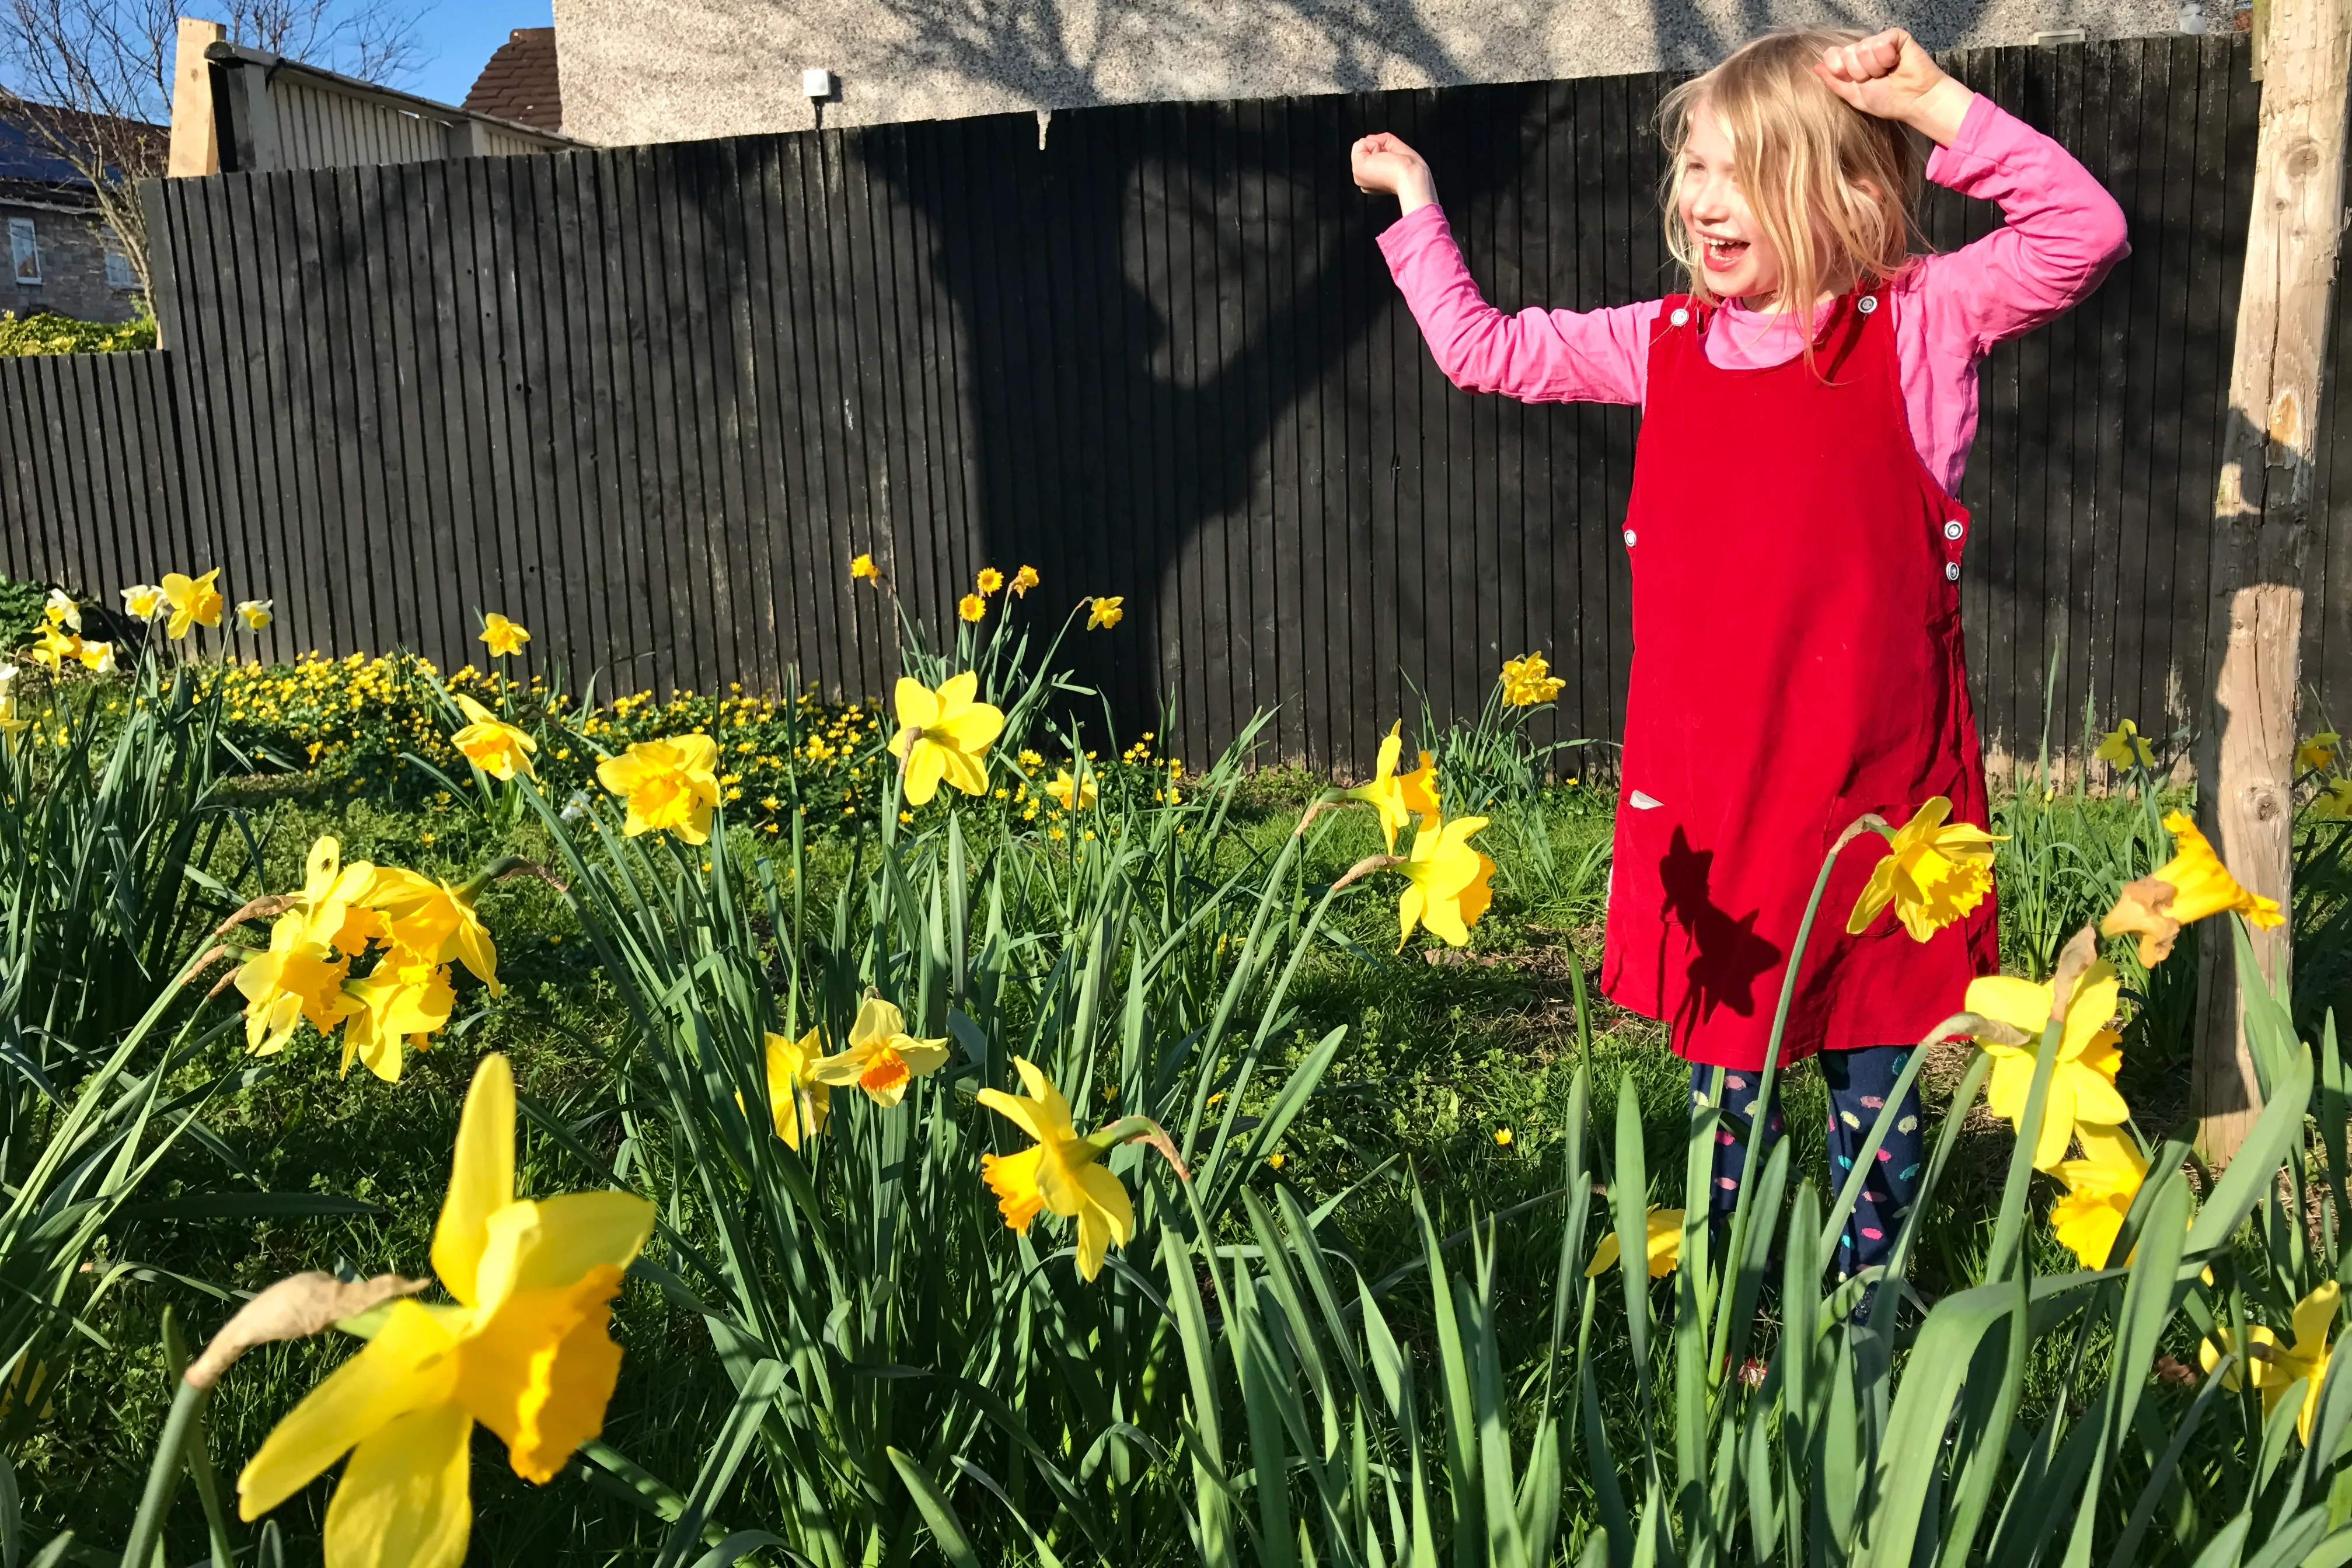 A child dancing among daffodils on a Spring day